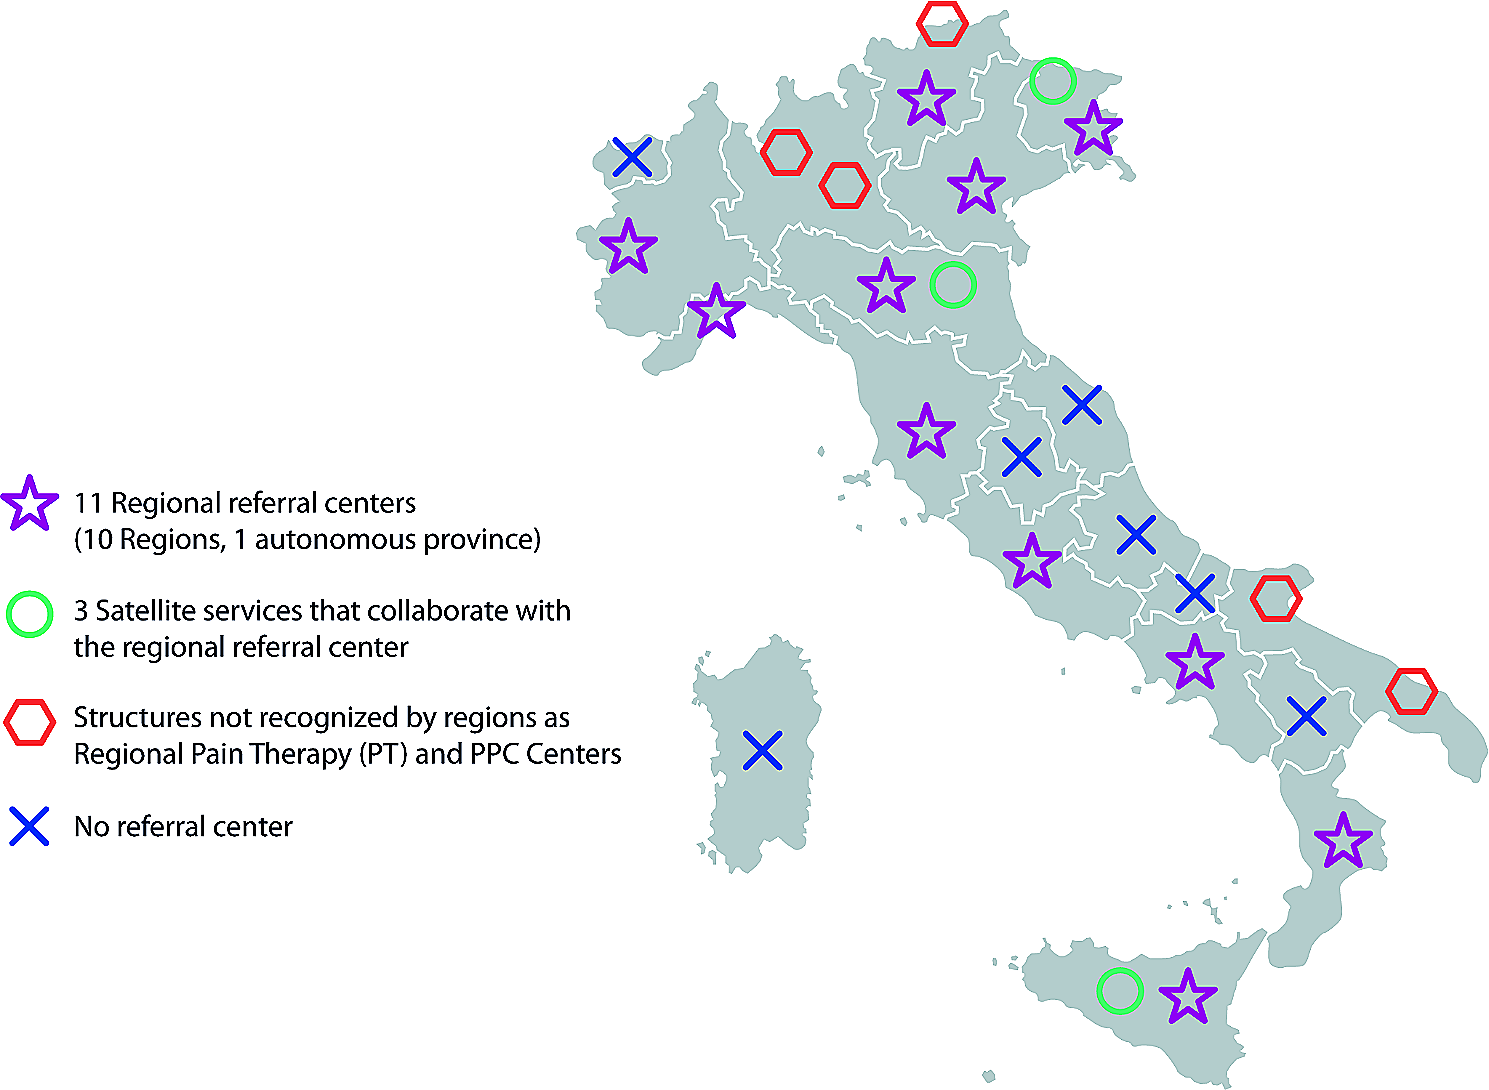 The specialized pediatric palliative care service in Italy: how is it working? Results of the nationwide PalliPed study